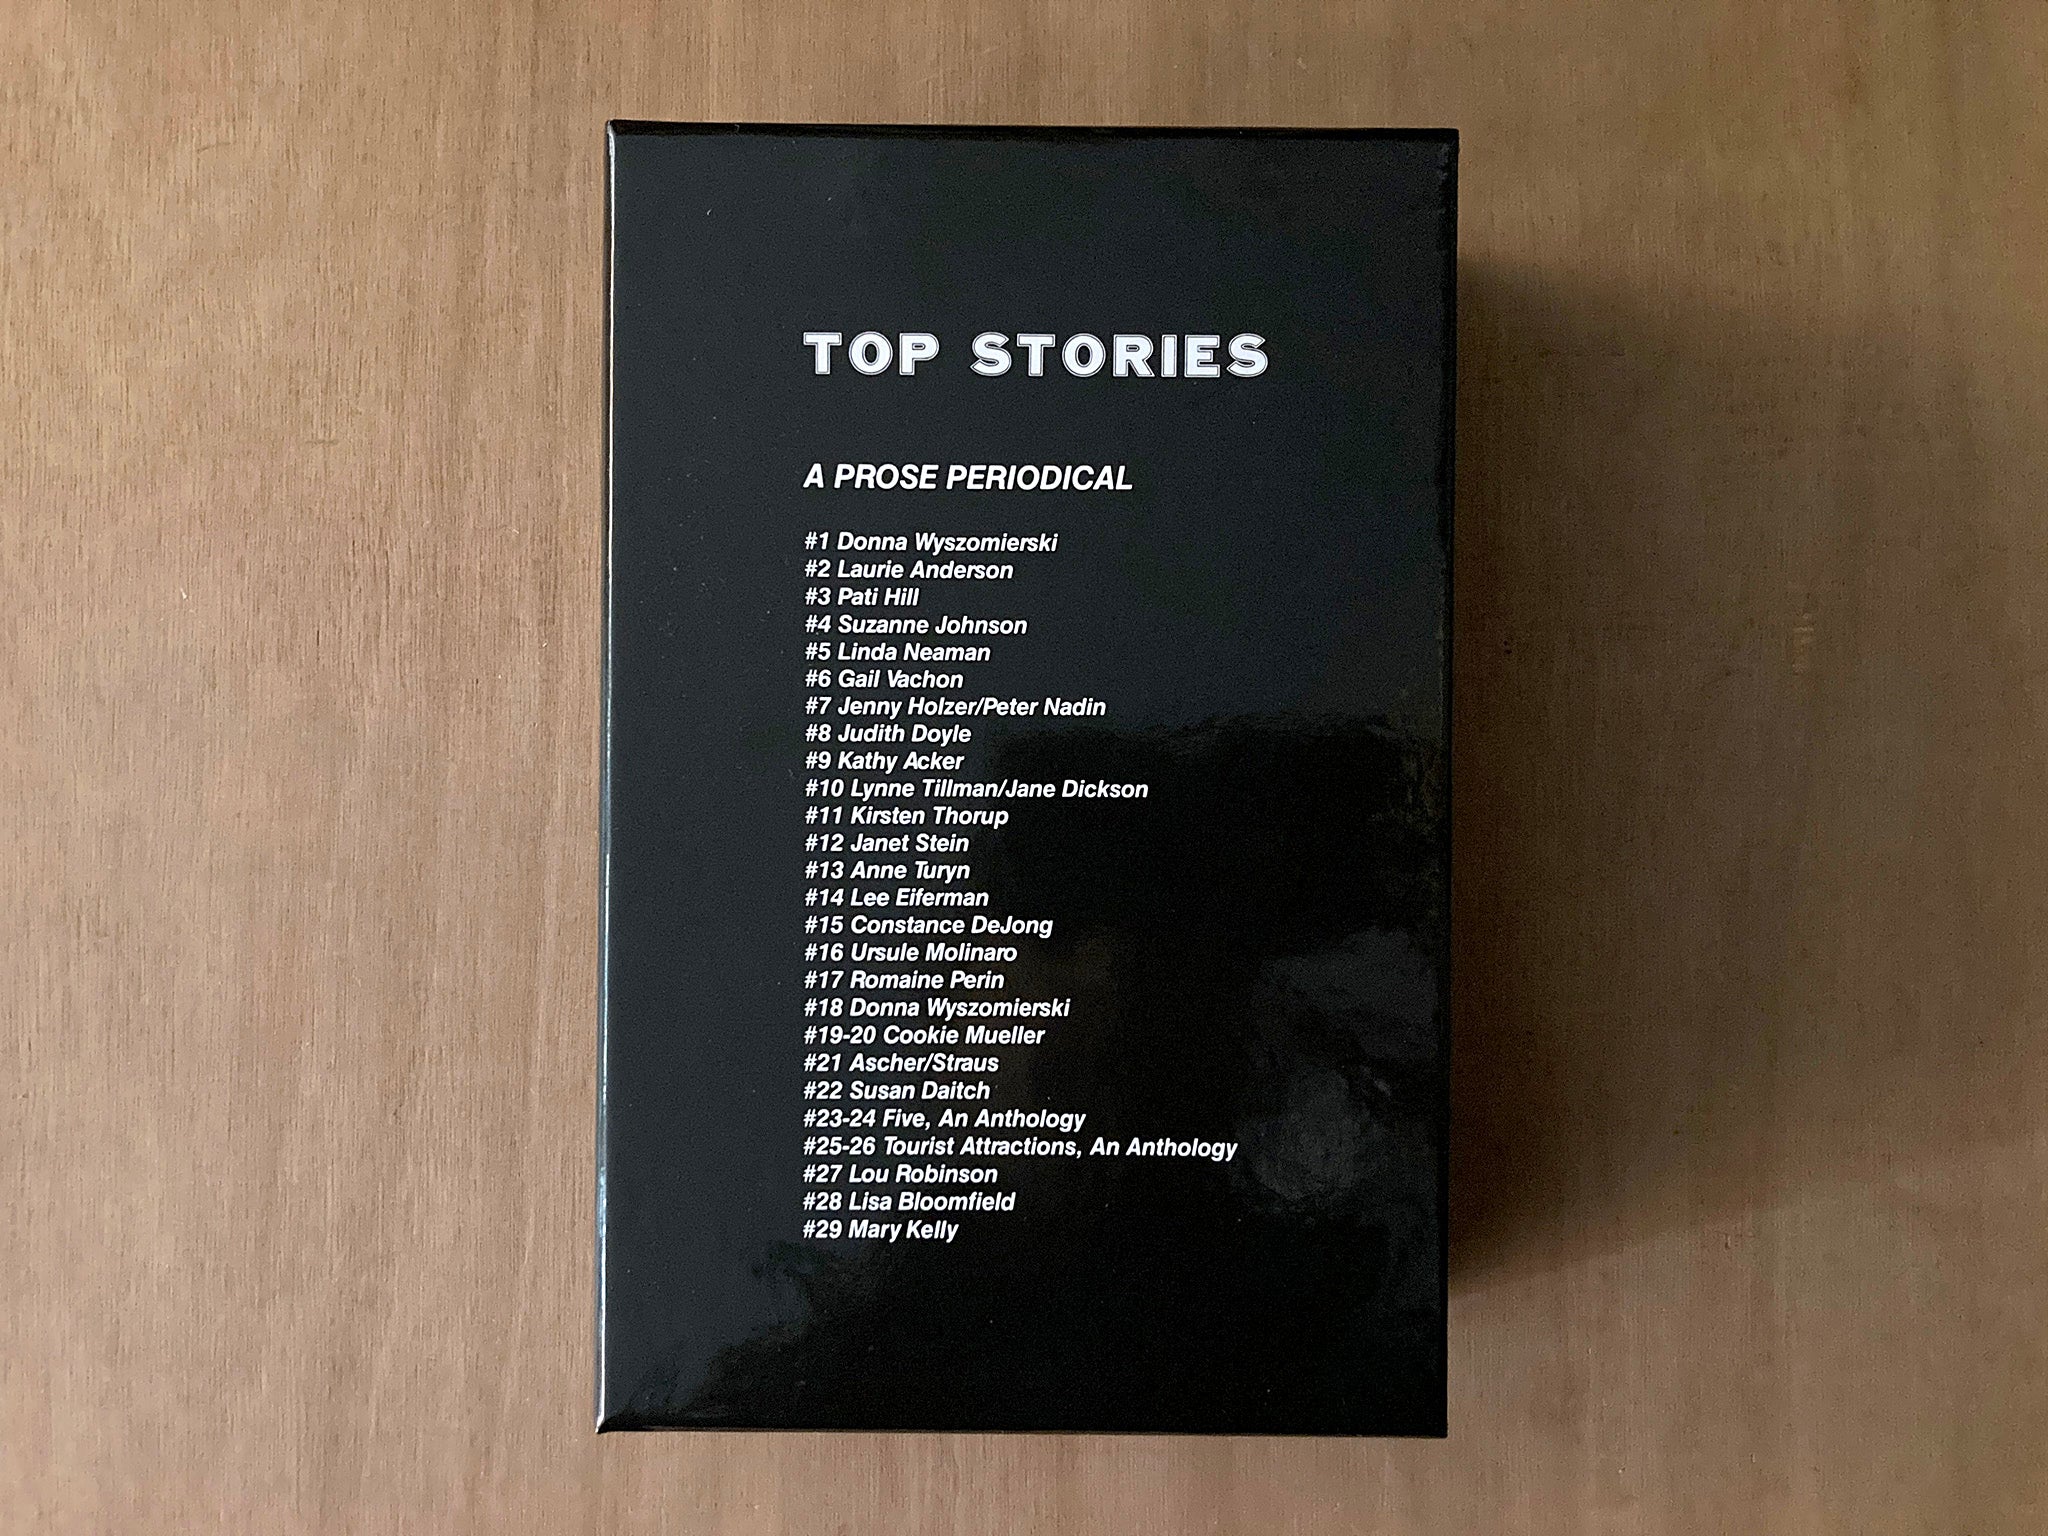 TOP STORIES by Various Artists, edited by Anne Turyn